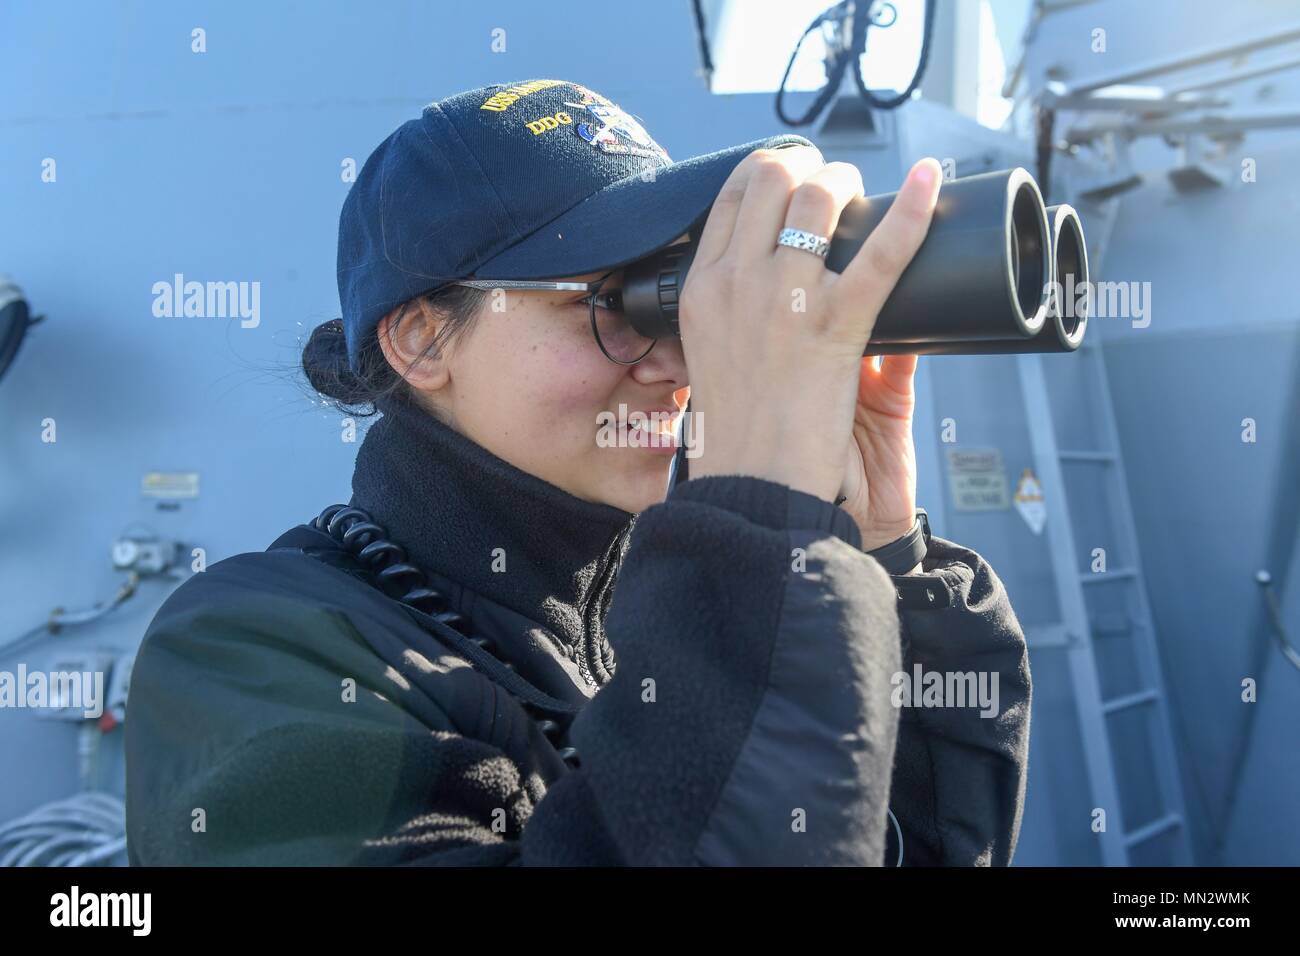 170822-N-GX781-191 SKAGERRAK STRAIT (Aug. 22, 2017) - Ensign Paris Bess, from Troy, Ohio, scans the horizon with binoculars aboard the Arleigh Burke-class guided-missile destroyer USS James E. Williams (DDG 95) as the ship transits the Skagerrak Strait Aug. 22, 2017.  James E. Williams, home-ported in Norfolk, is on a routine deployment to the U.S. 6th Fleet area of operations in support of U.S. national security interests in Europe. (U.S. Navy photo by Mass Communication Specialist 3rd Class Colbey Livingston/ Released) Stock Photo